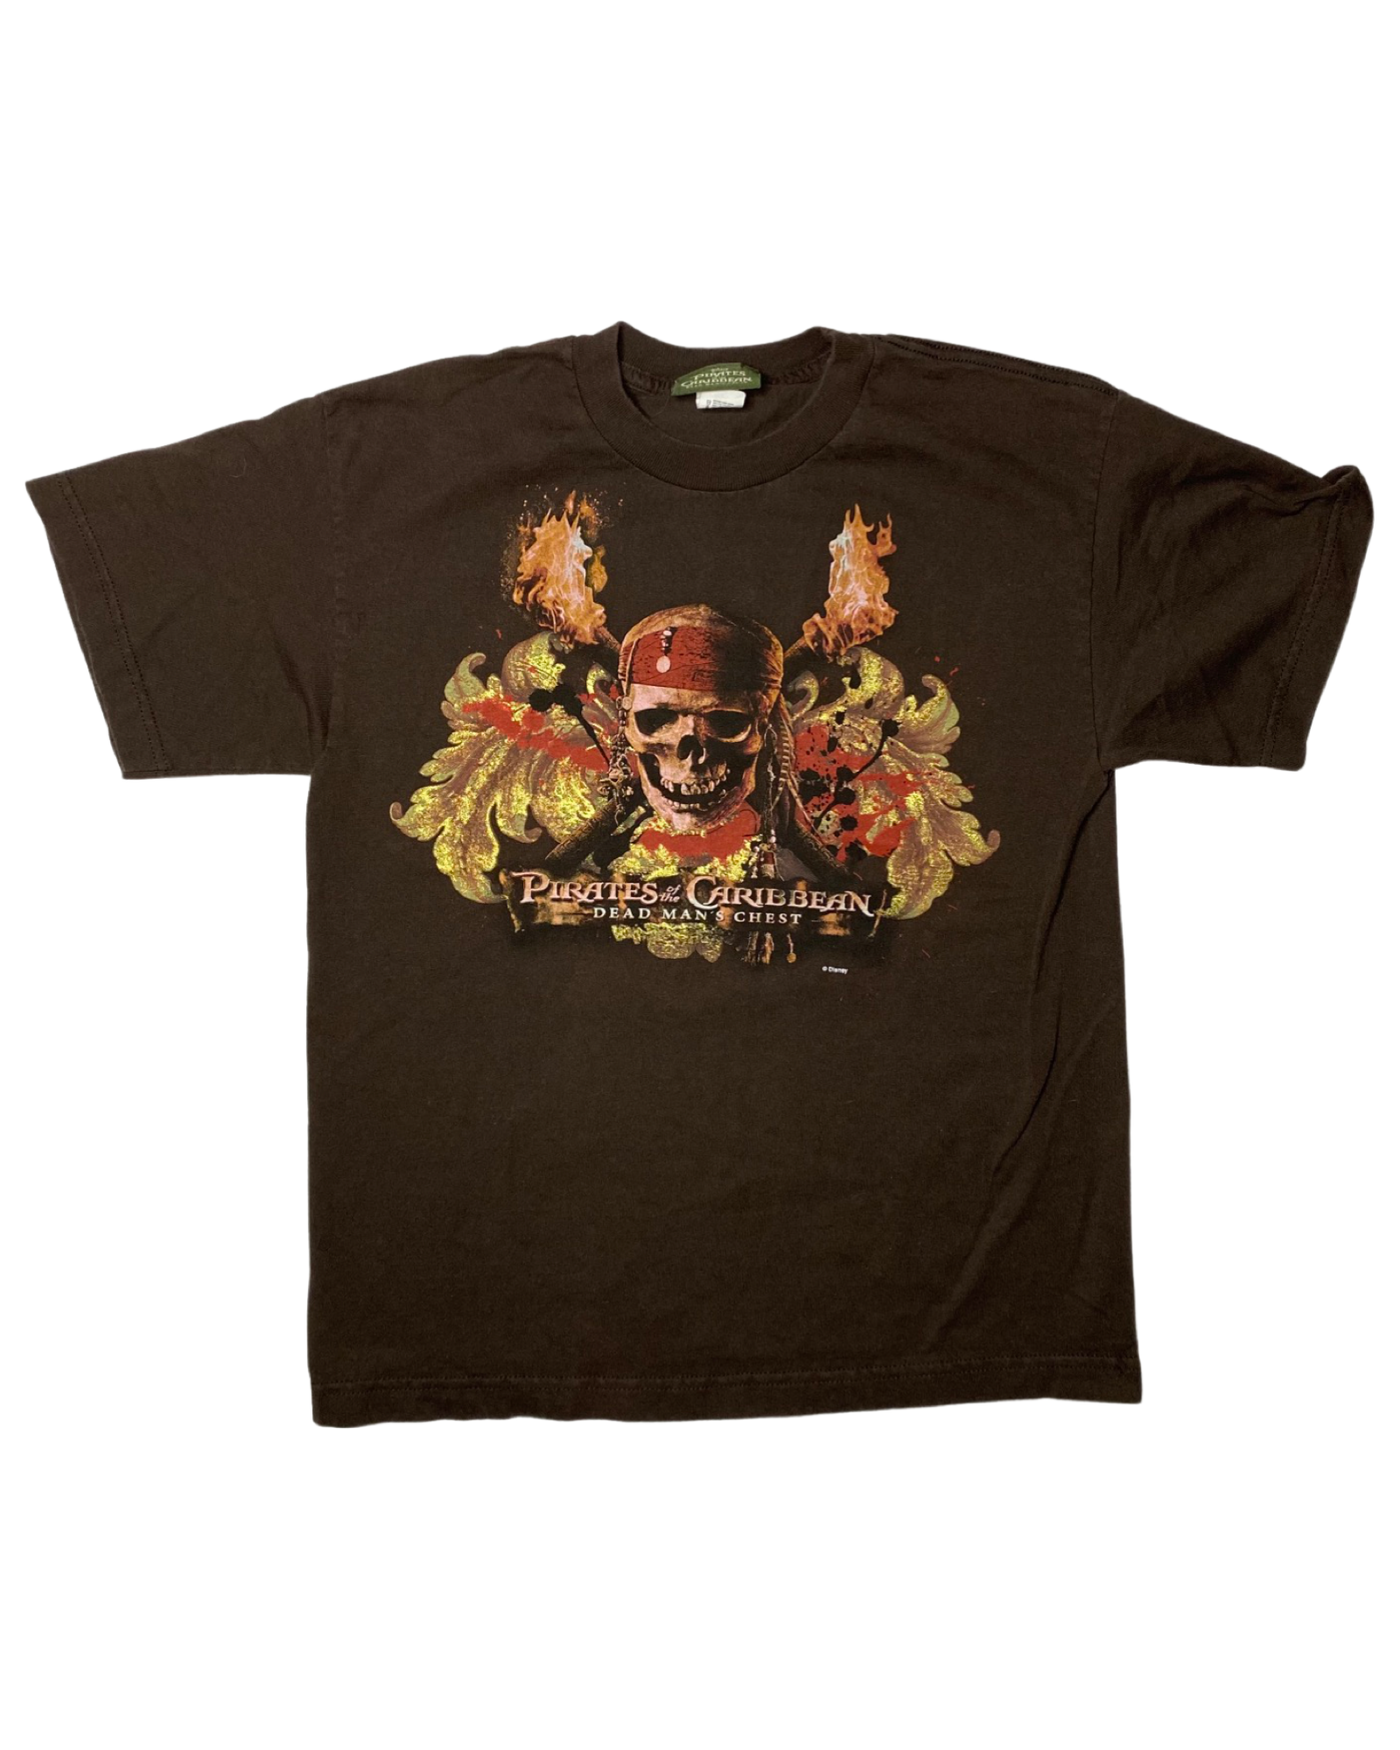 Vintage Pirates of the Caribbean T-Shirt